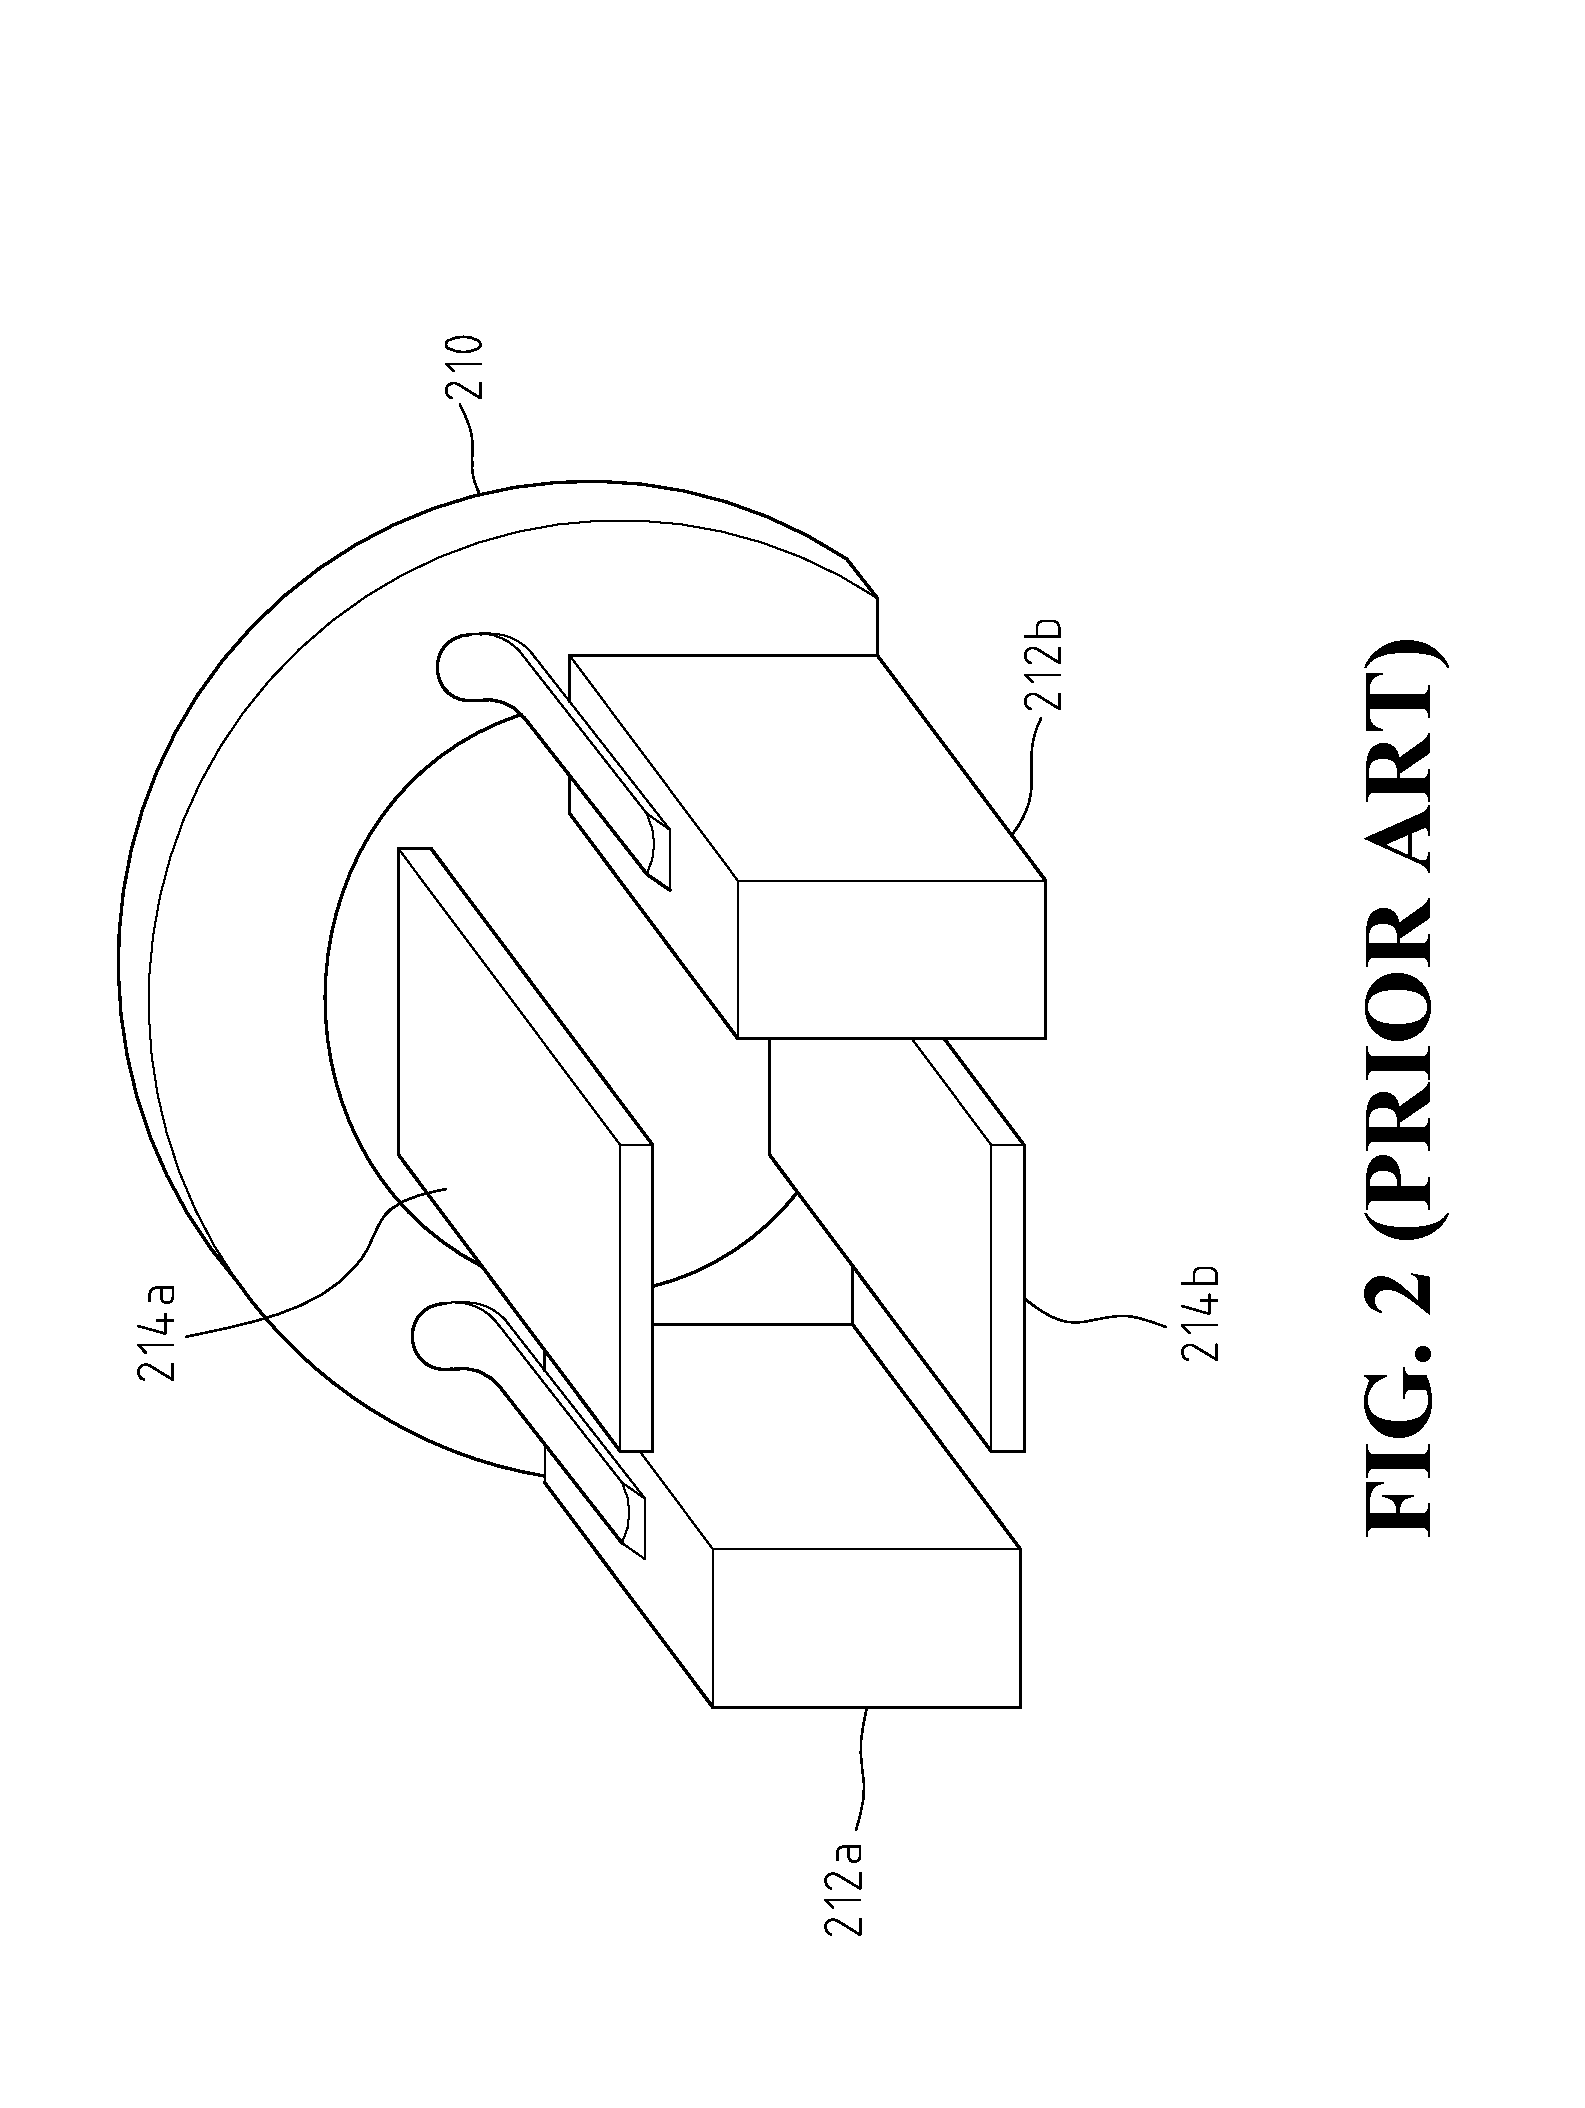 Imaging System And Method For The Non-Pure Positron Emission Tomography